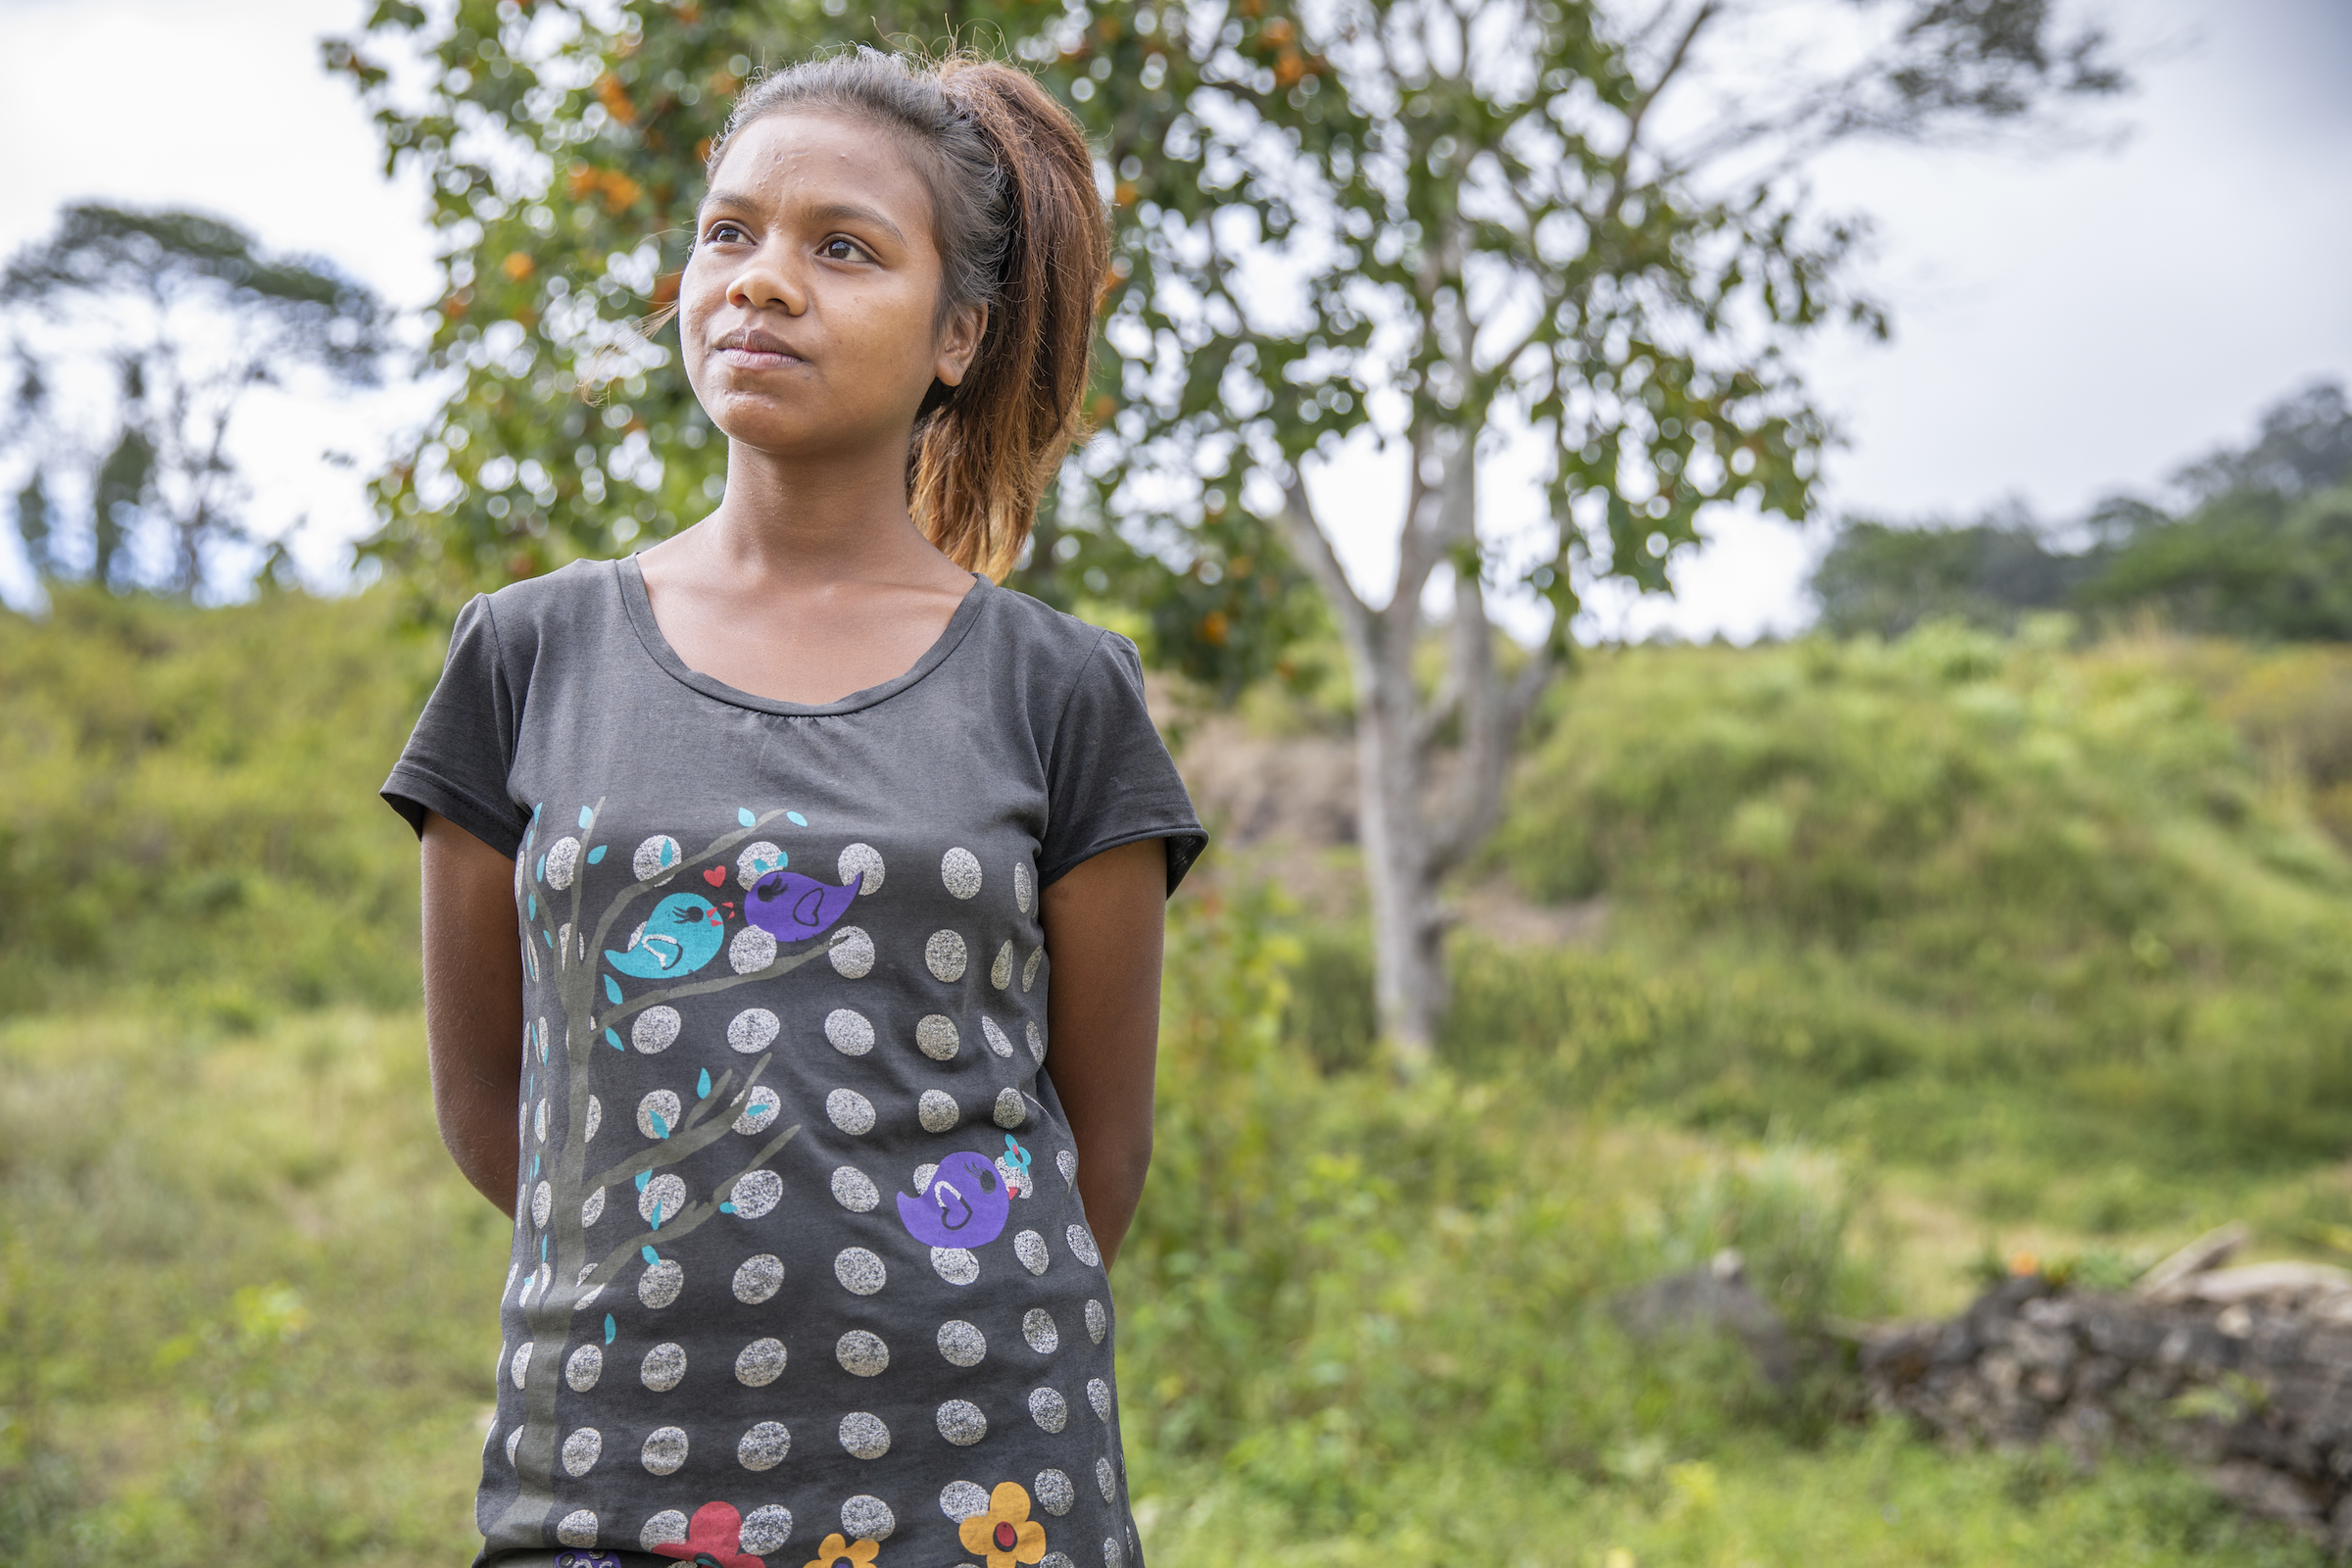 Living in the remote mountains of timor-leste, 18-year-old lourdes studied by solar lamp for years until her family received electricity. now she’s preparing to attend university in dili, the nation’s capital, where she dreams of being minister of education. photo: ezra millstein/mercy corps